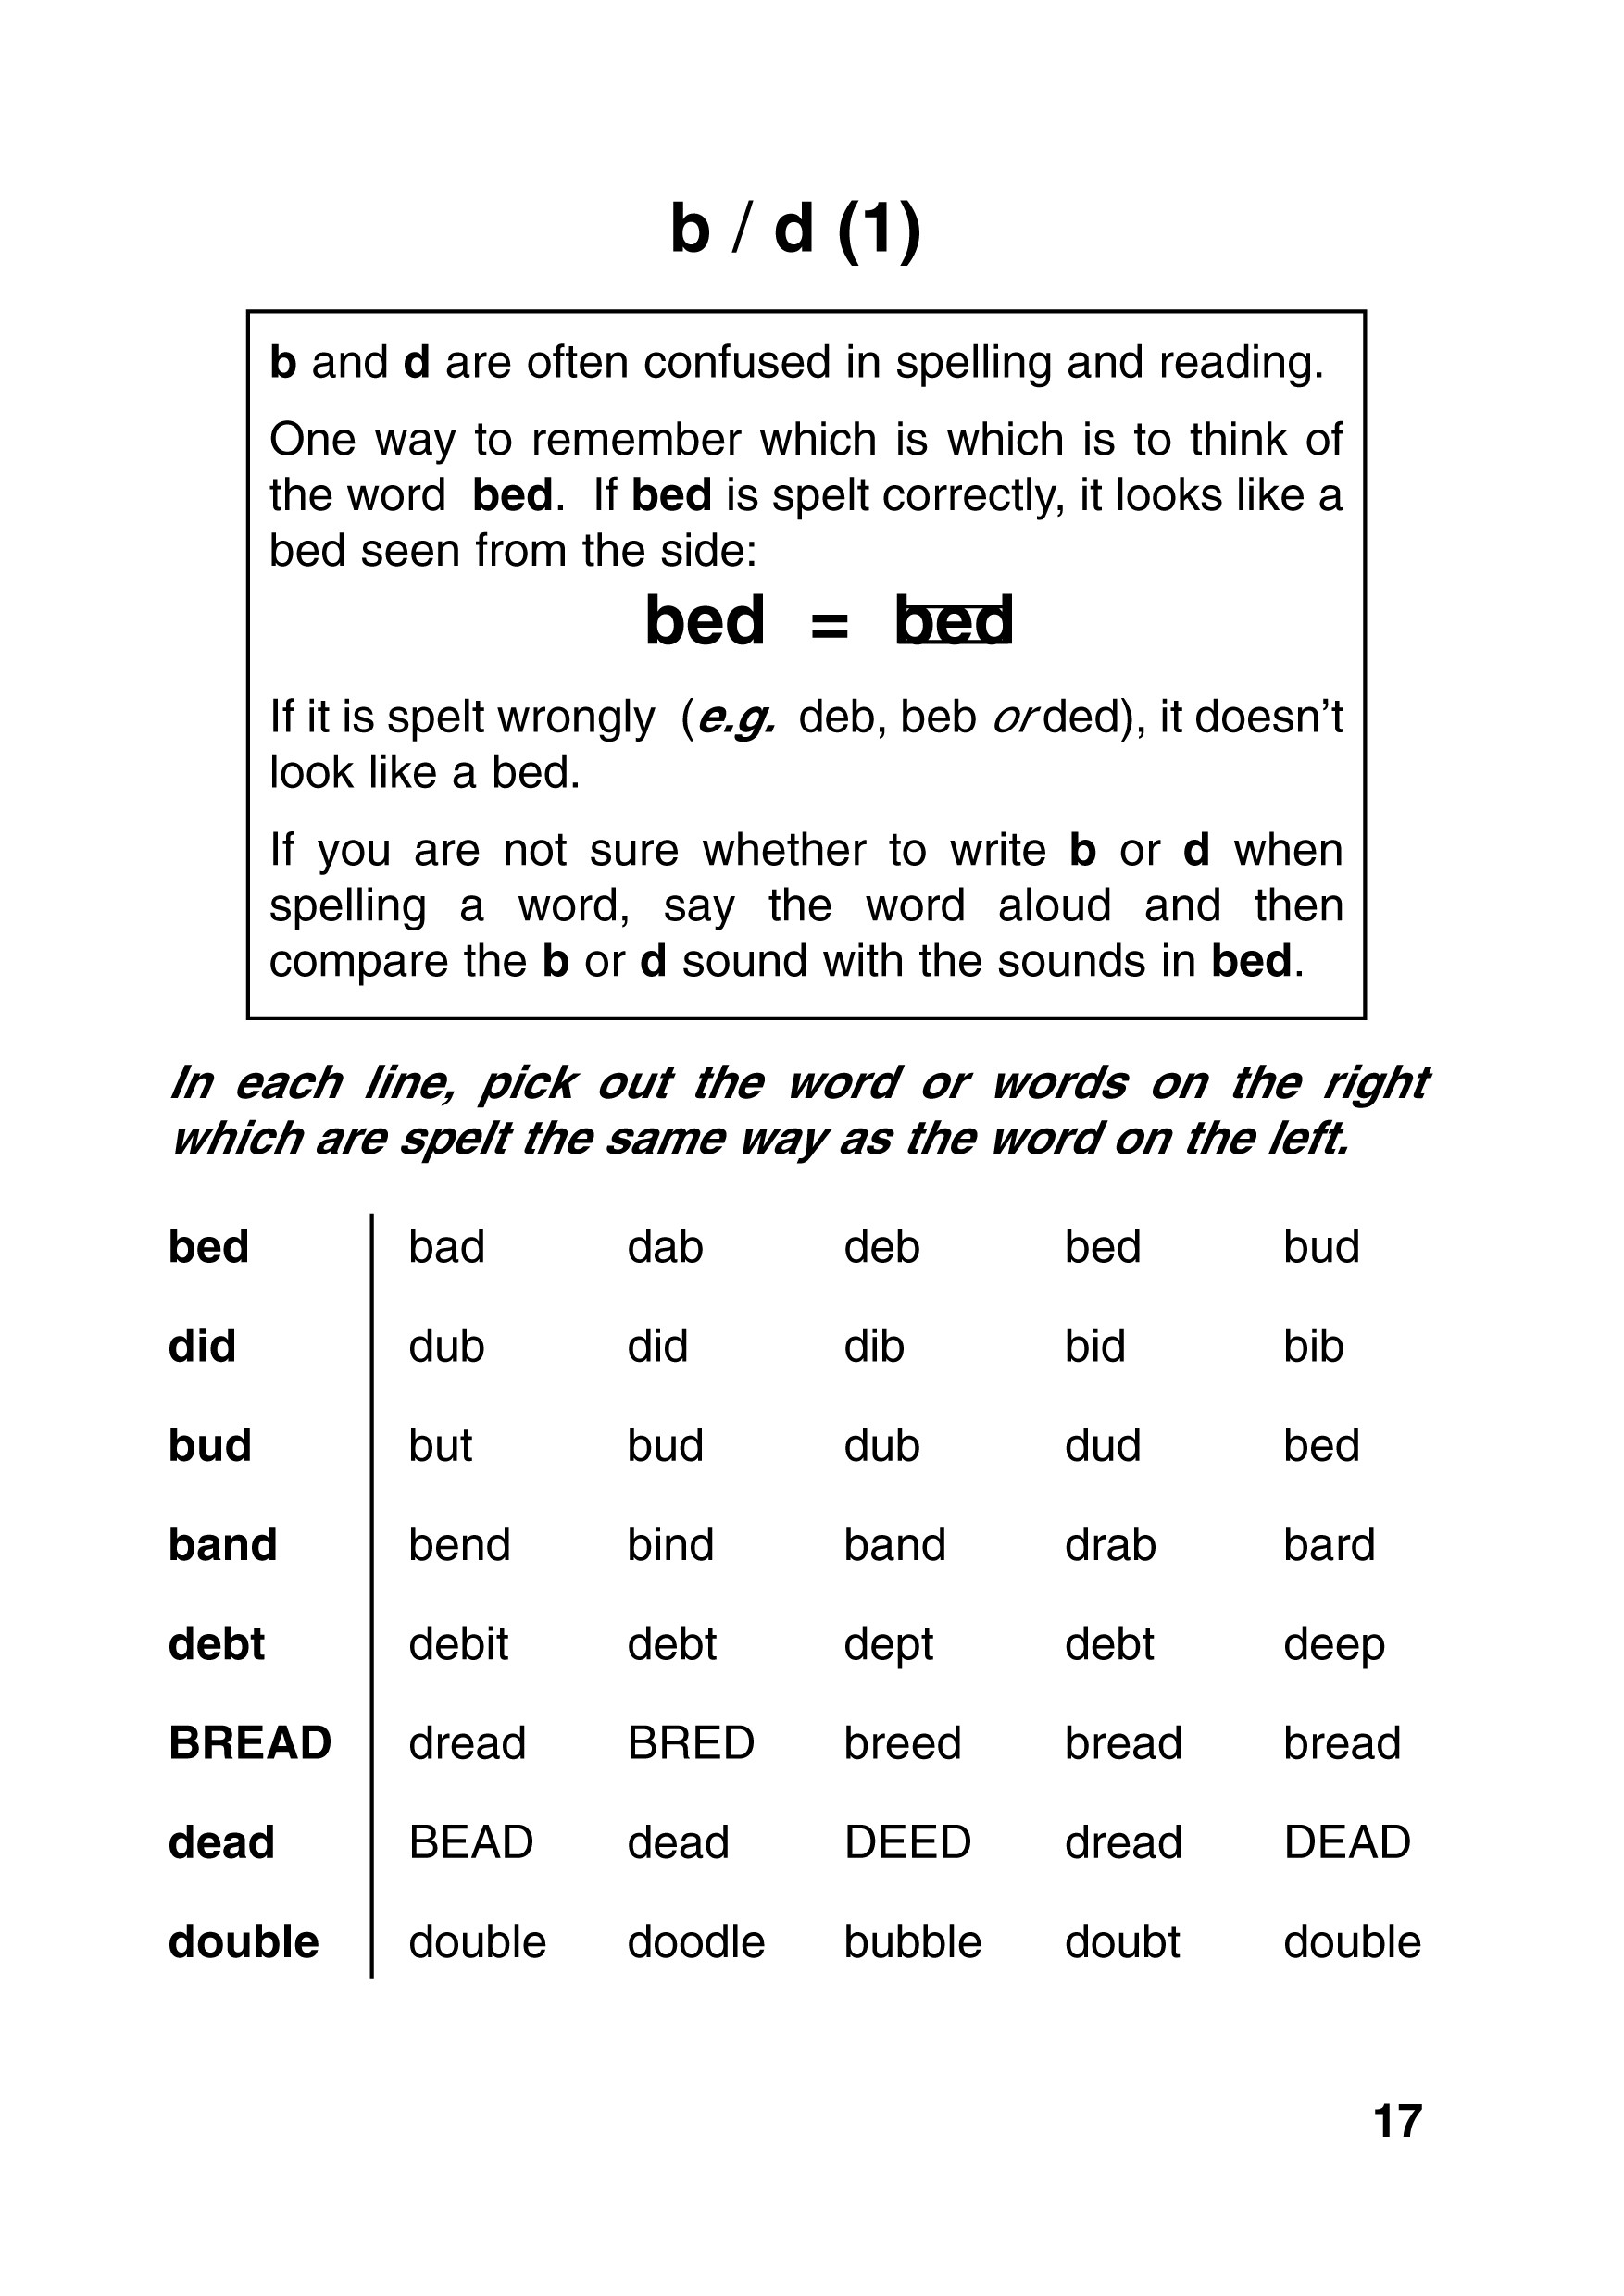 17 Best Images Of Adult Literacy Worksheets For Reading Adult Literacy Worksheets Math